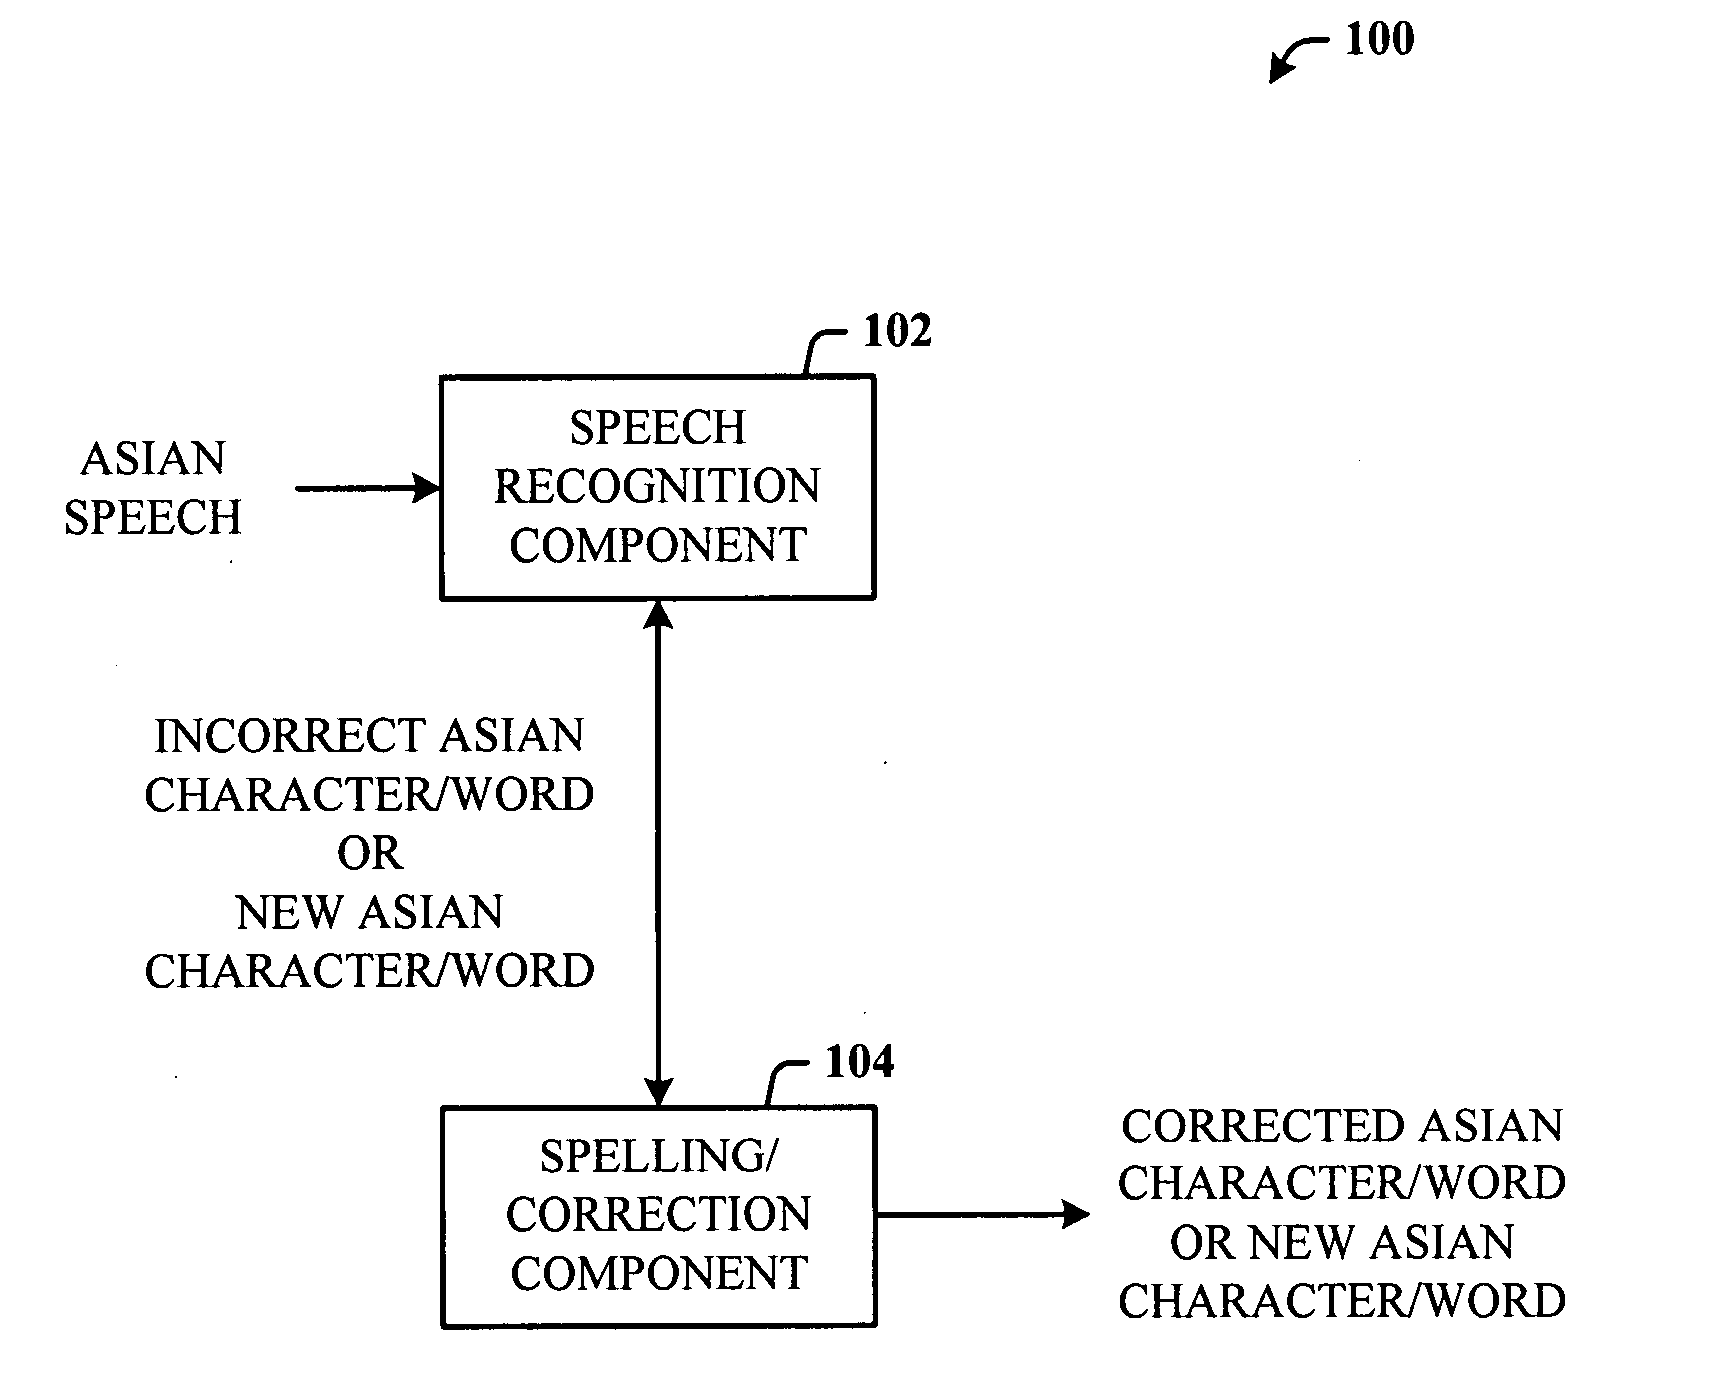 Recognition architecture for generating Asian characters